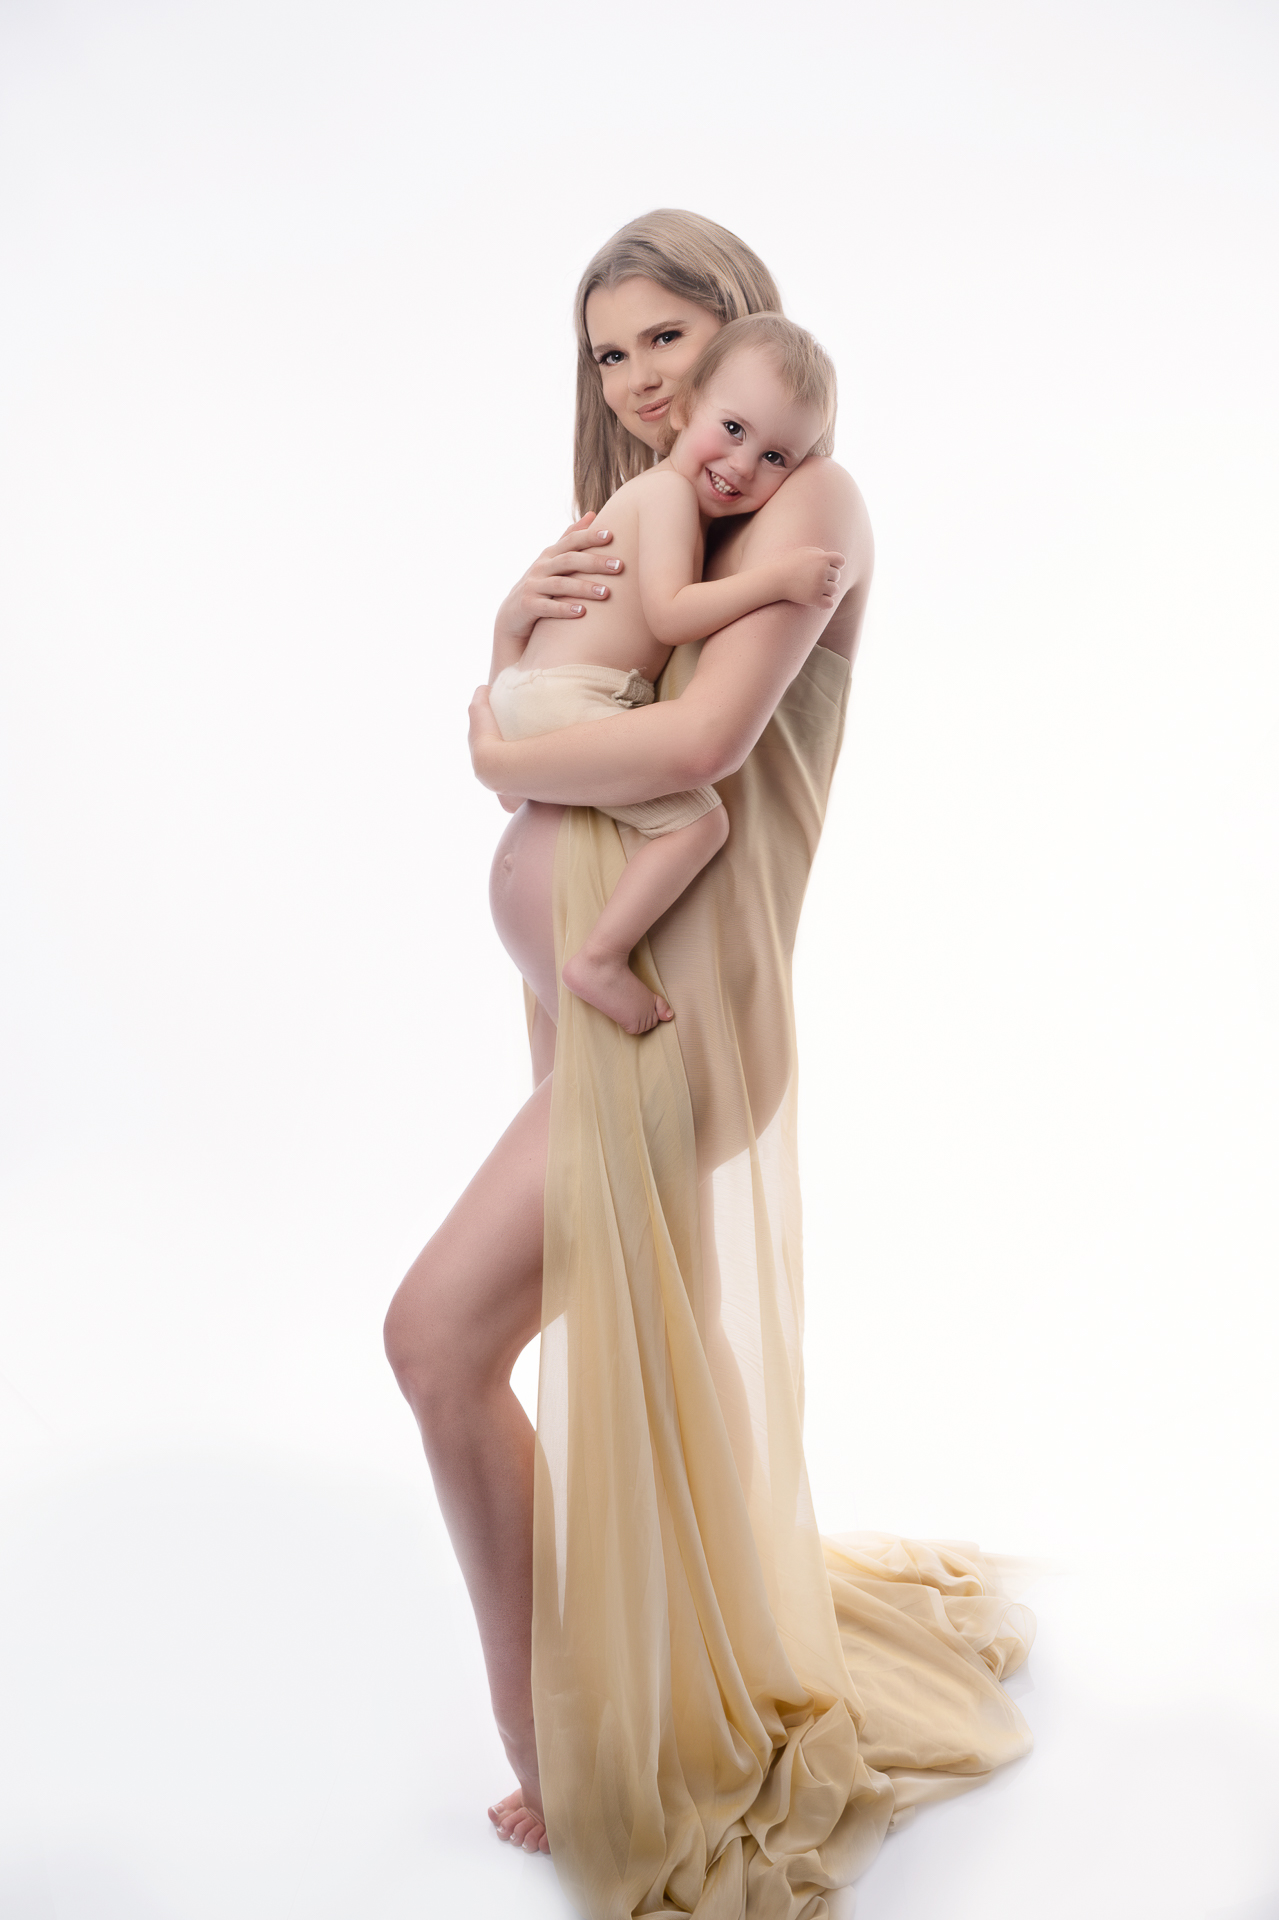 pregnant woman holds her toddler son while wearing a golden fabric dress, white backdrop